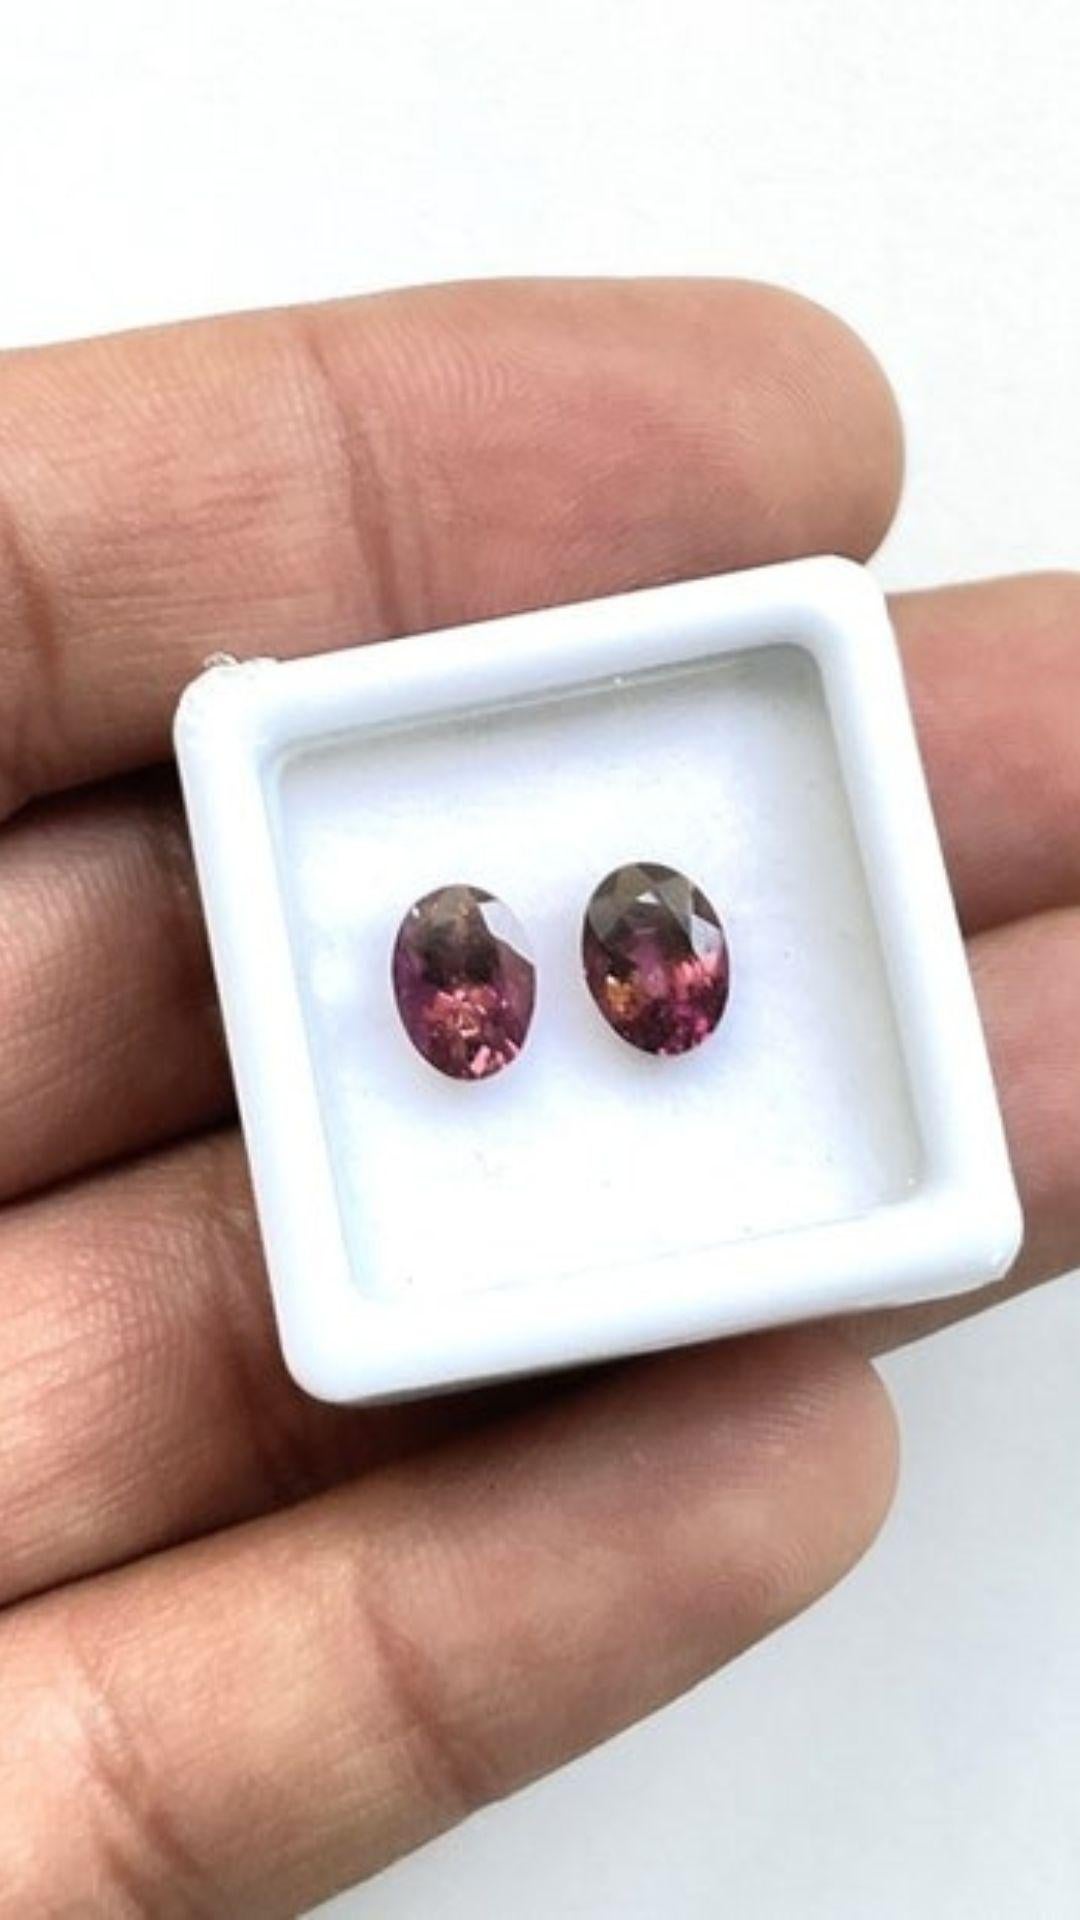 Oval Cut 2.35 Carats Tourmaline Match Pair, Pink Tourmaline Faceted Ovals Cut Stones For Sale